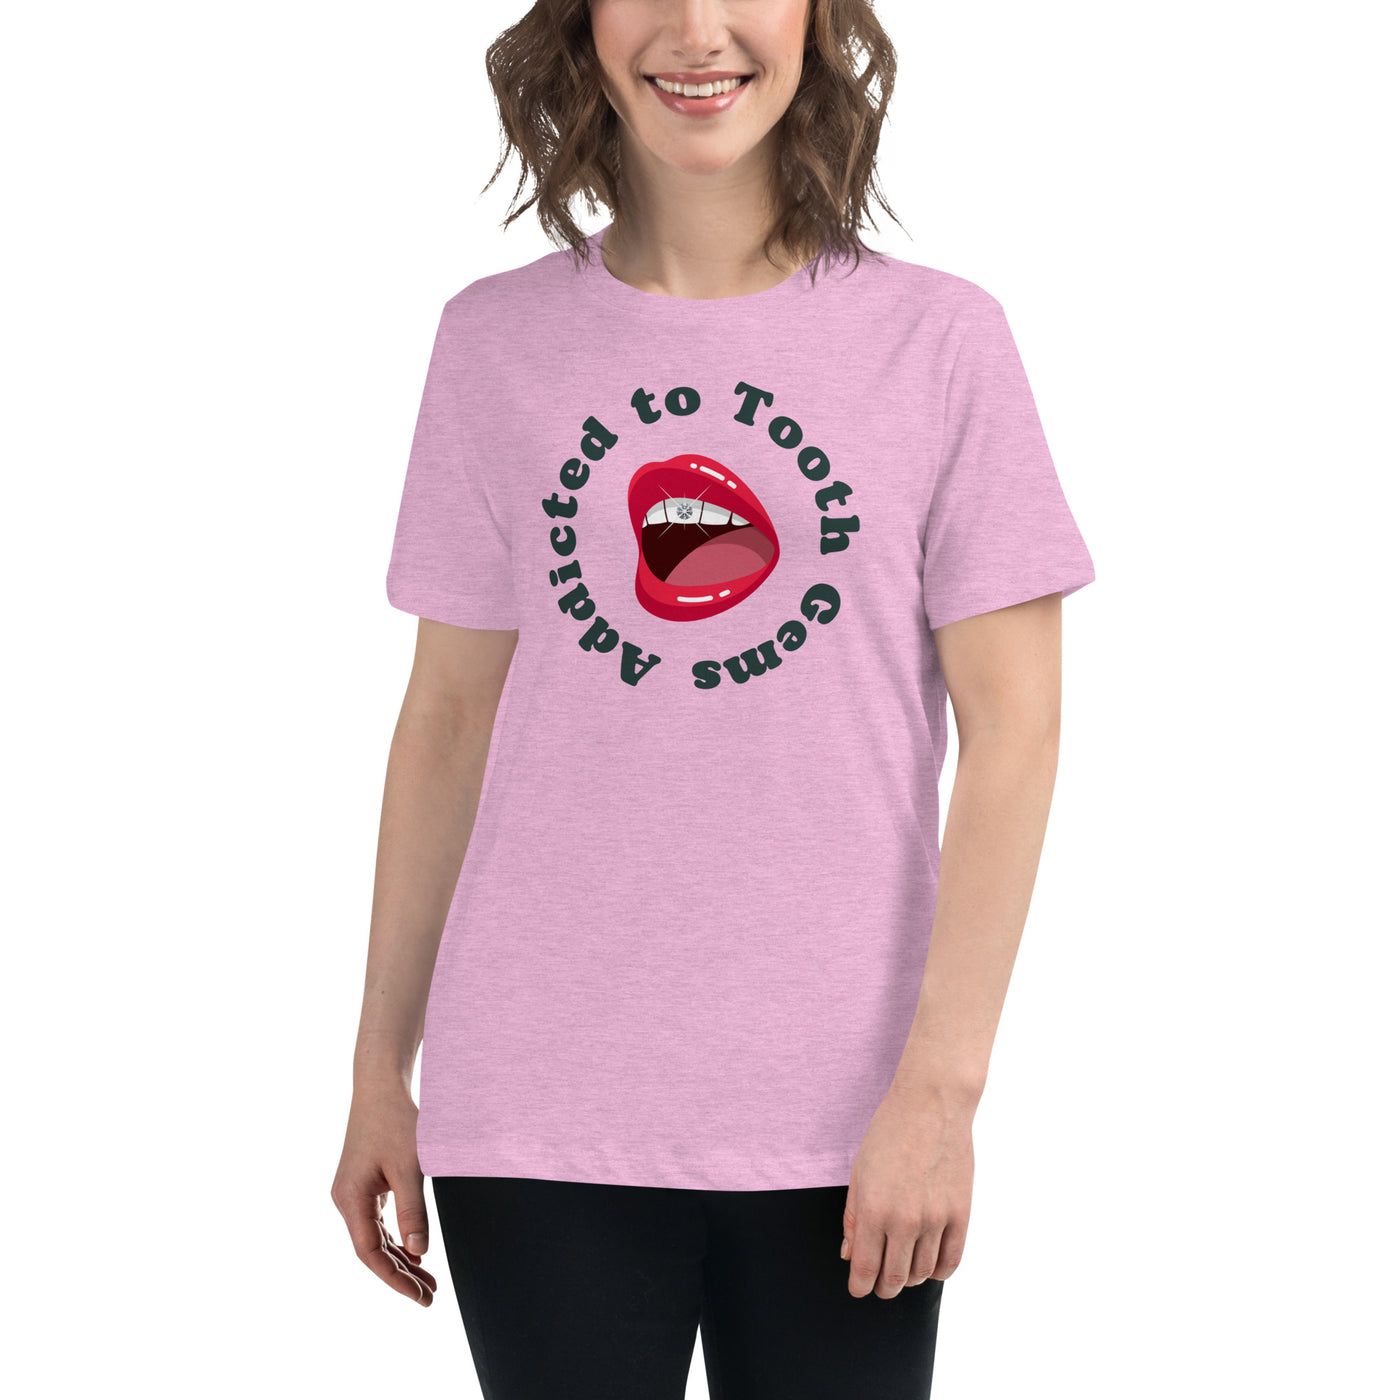 Addicted To Tooth Gems Women's Relaxed T-Shirt